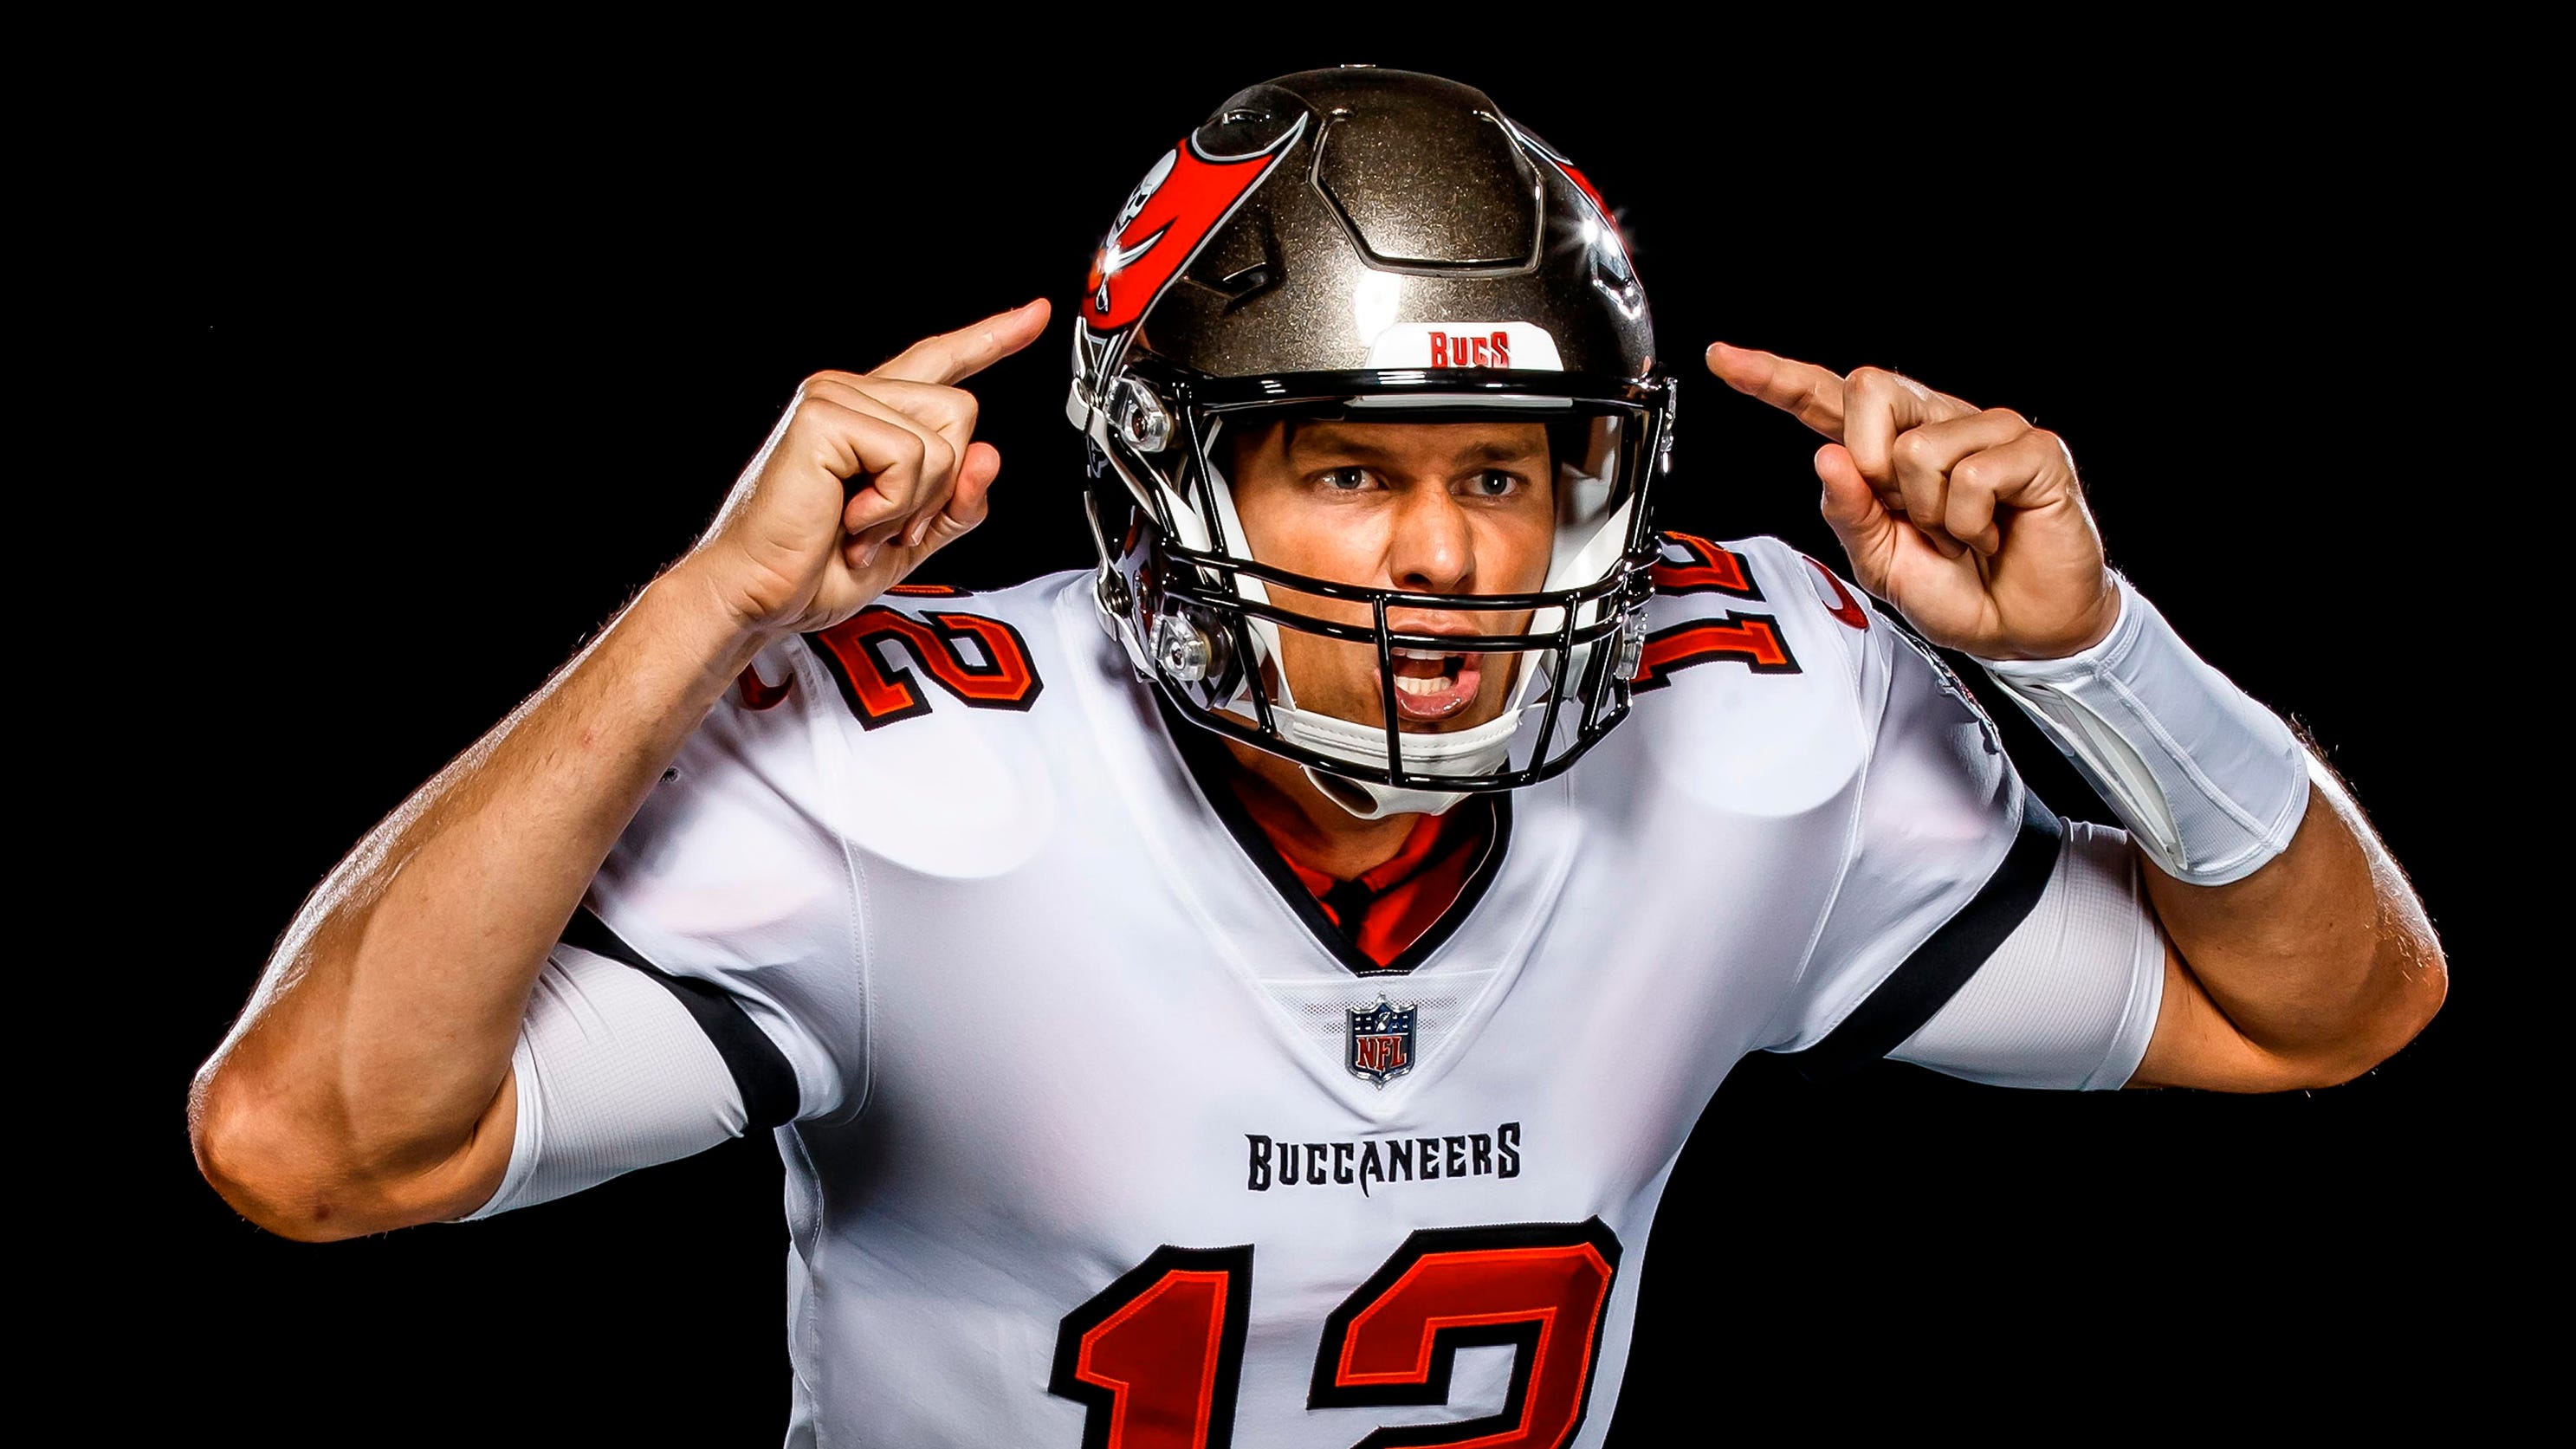 Tom Brady Buccaneers release first photos of QB in new uniform